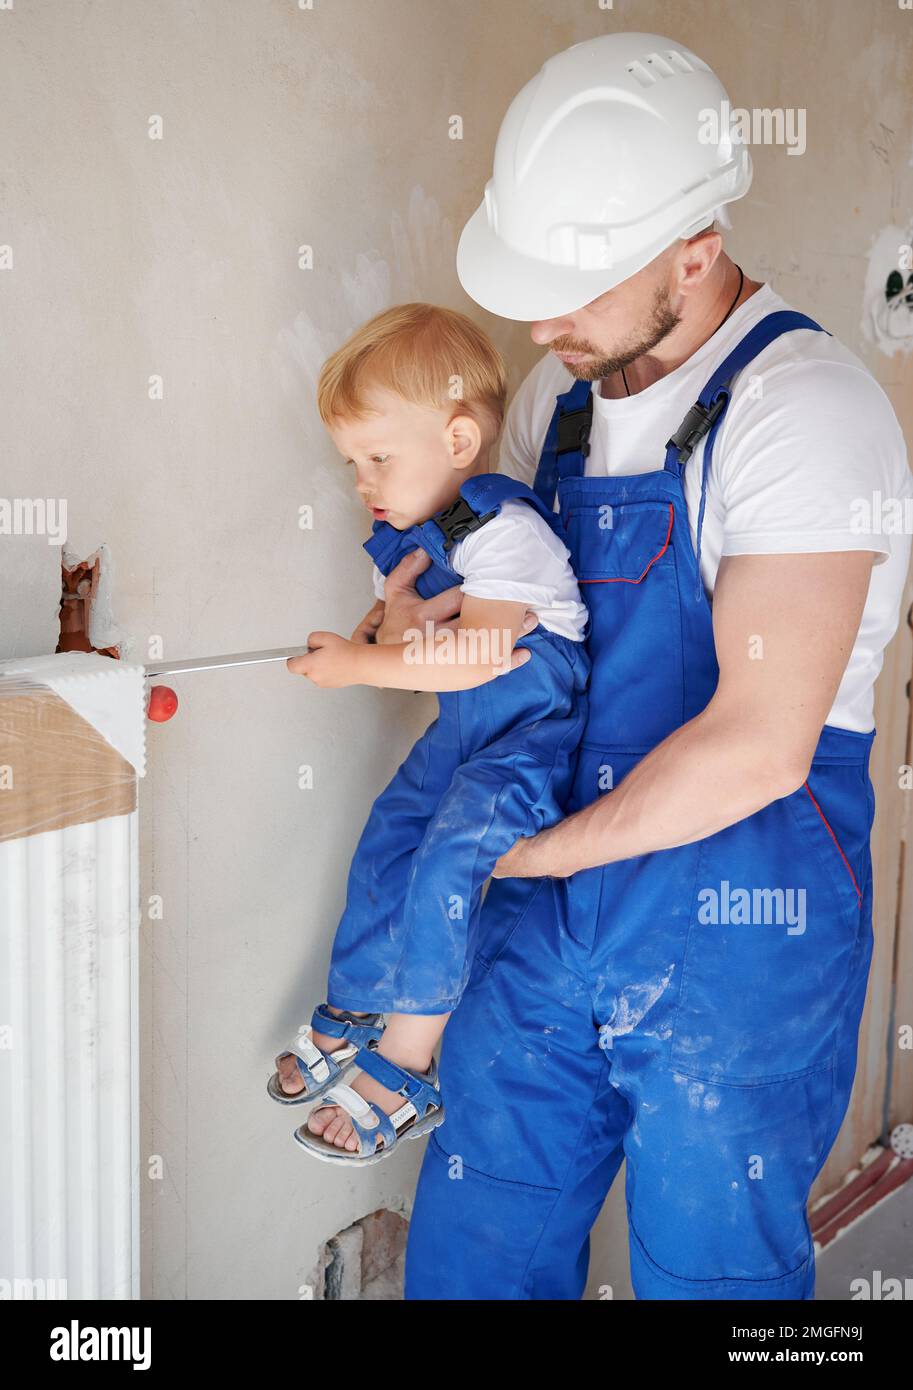 https://c8.alamy.com/comp/2MGFN9J/adorable-child-using-construction-tool-while-installing-heating-radiator-with-father-at-home-male-plumber-in-work-overalls-and-safety-helmet-holding-baby-boy-home-renovation-and-parenting-concept-2MGFN9J.jpg